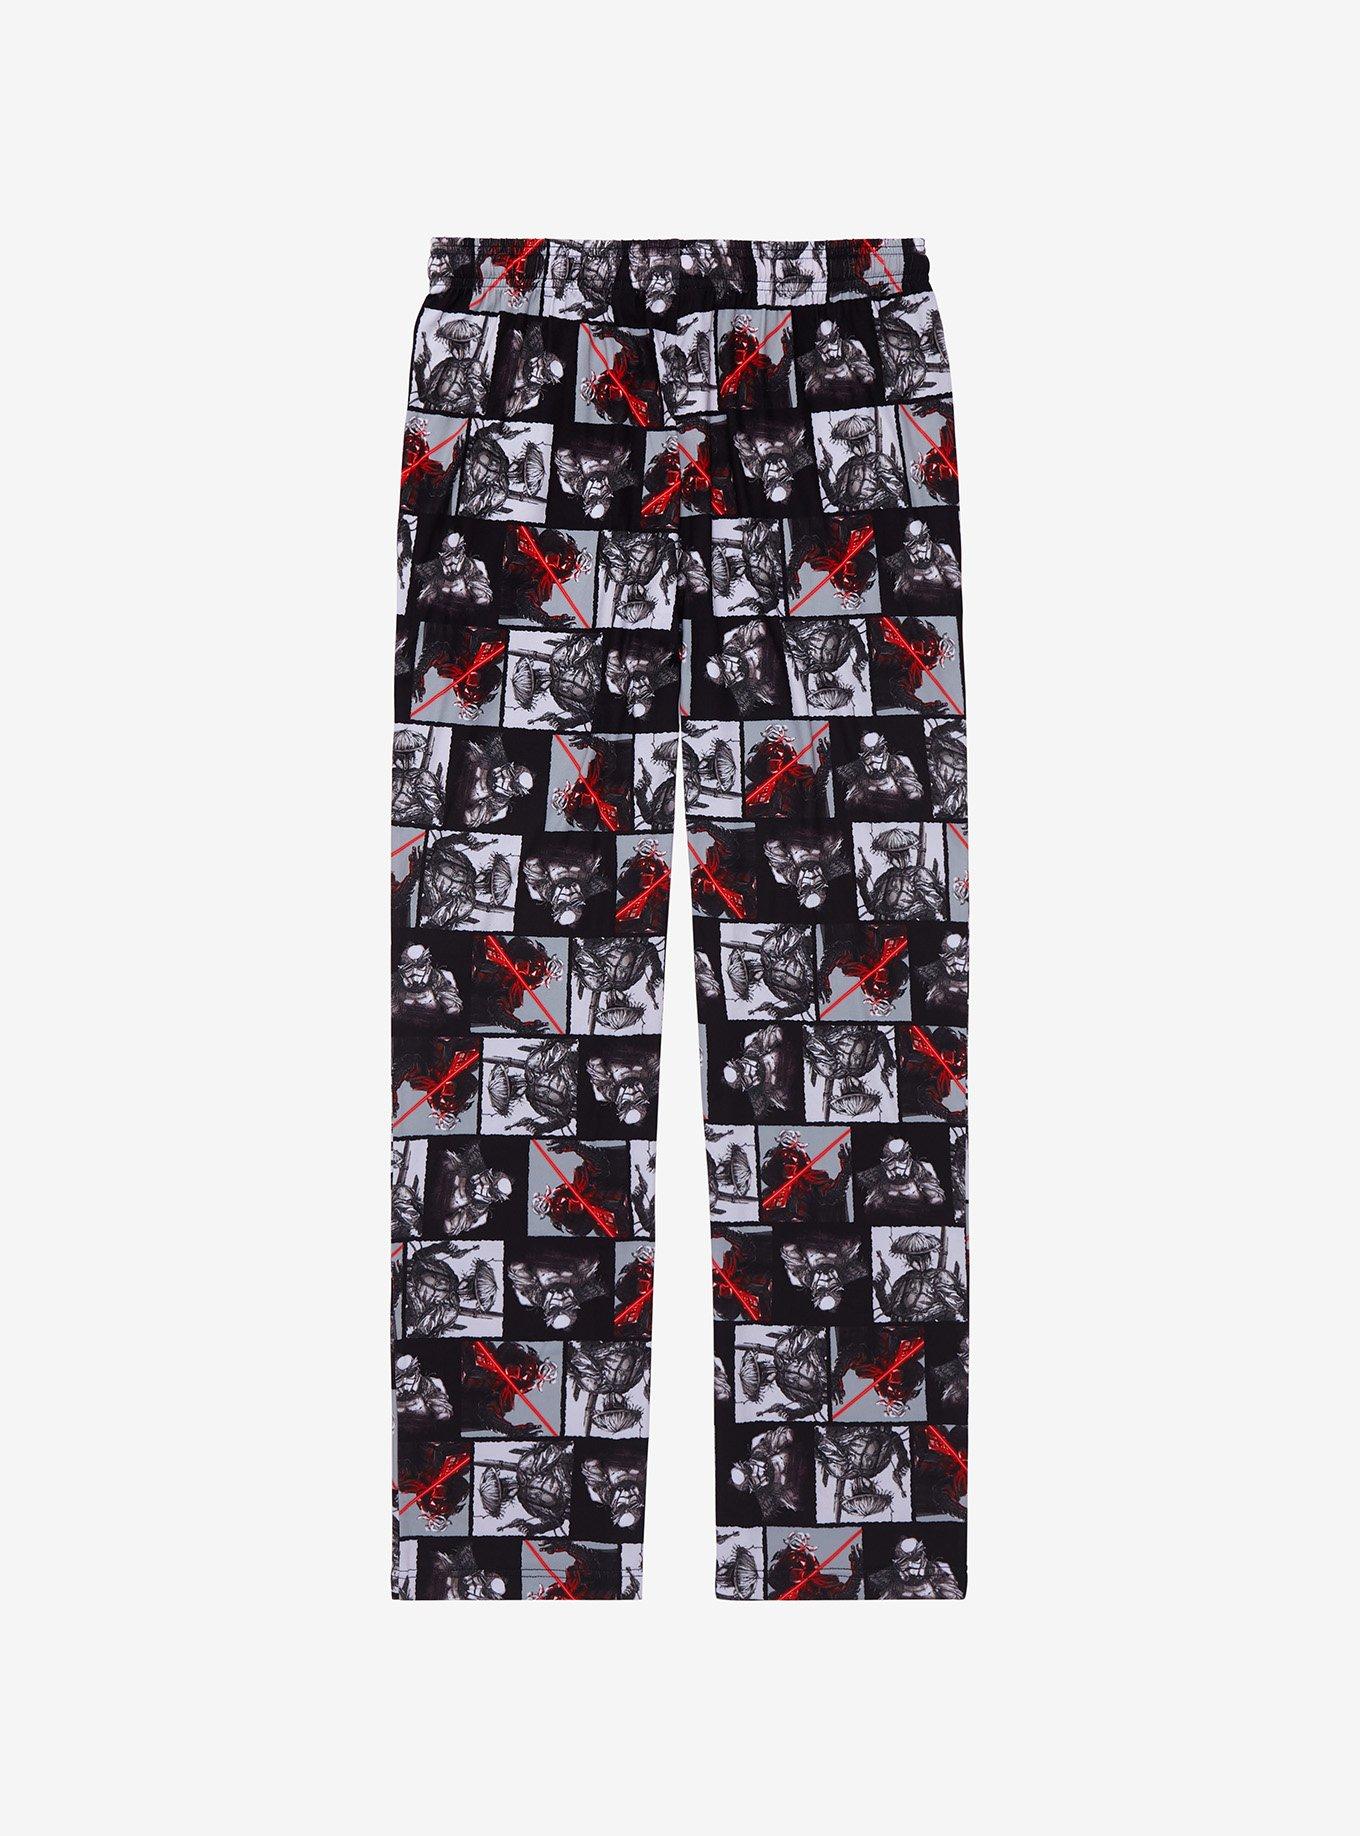 Star Wars Character Grid Allover Print Sleep Pants - BoxLunch Exclusive, MULTI, alternate